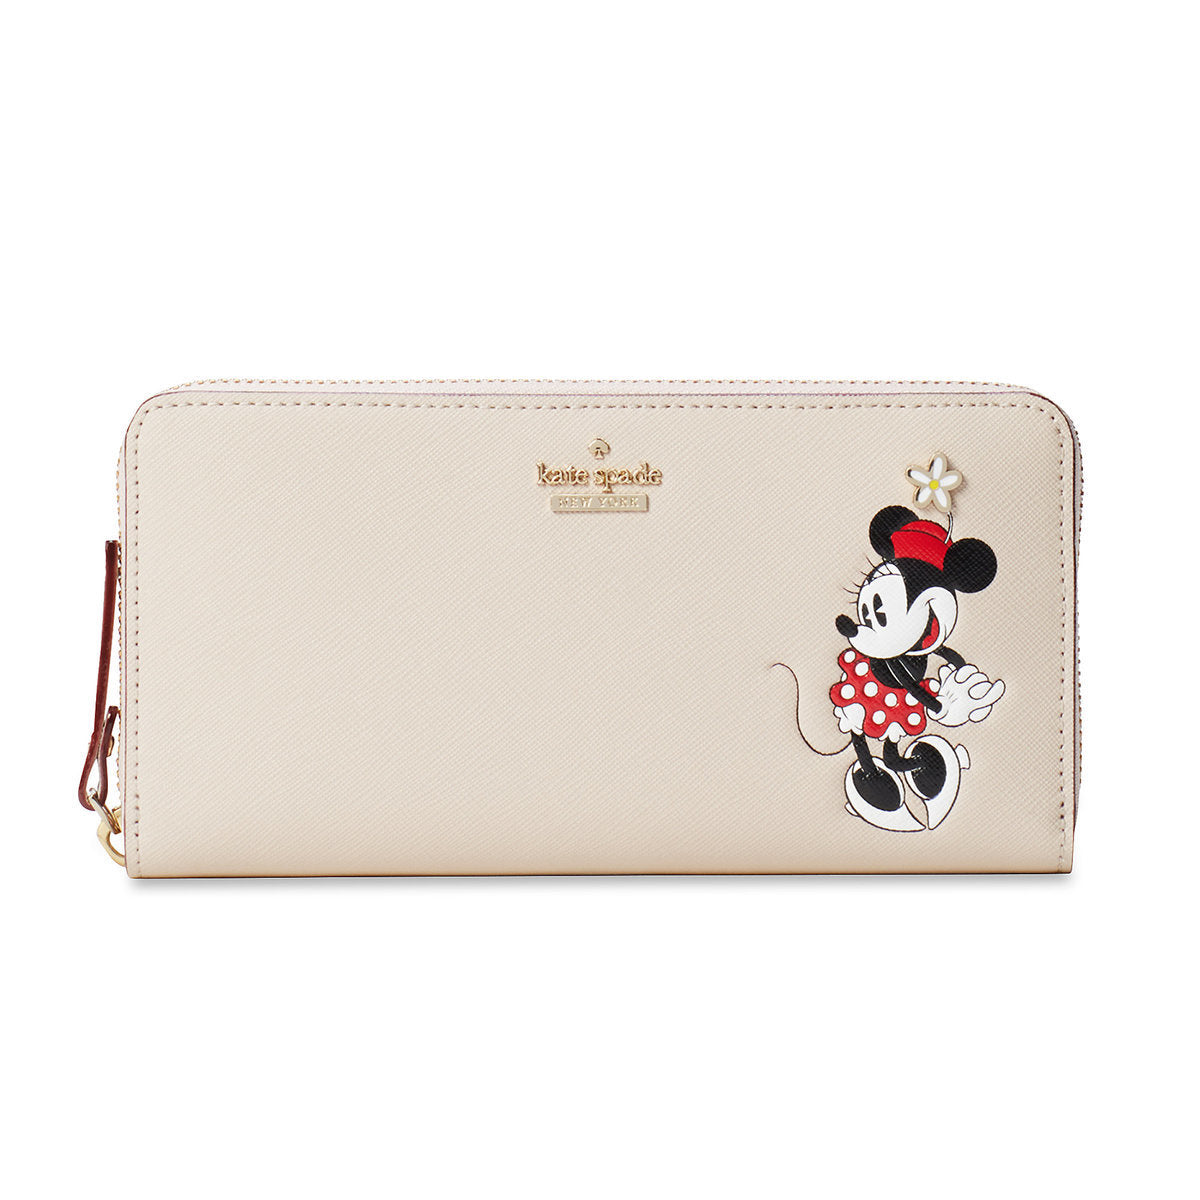 Disney Minnie Mouse Lacey Wallet by Kate Spade New York New with Tags